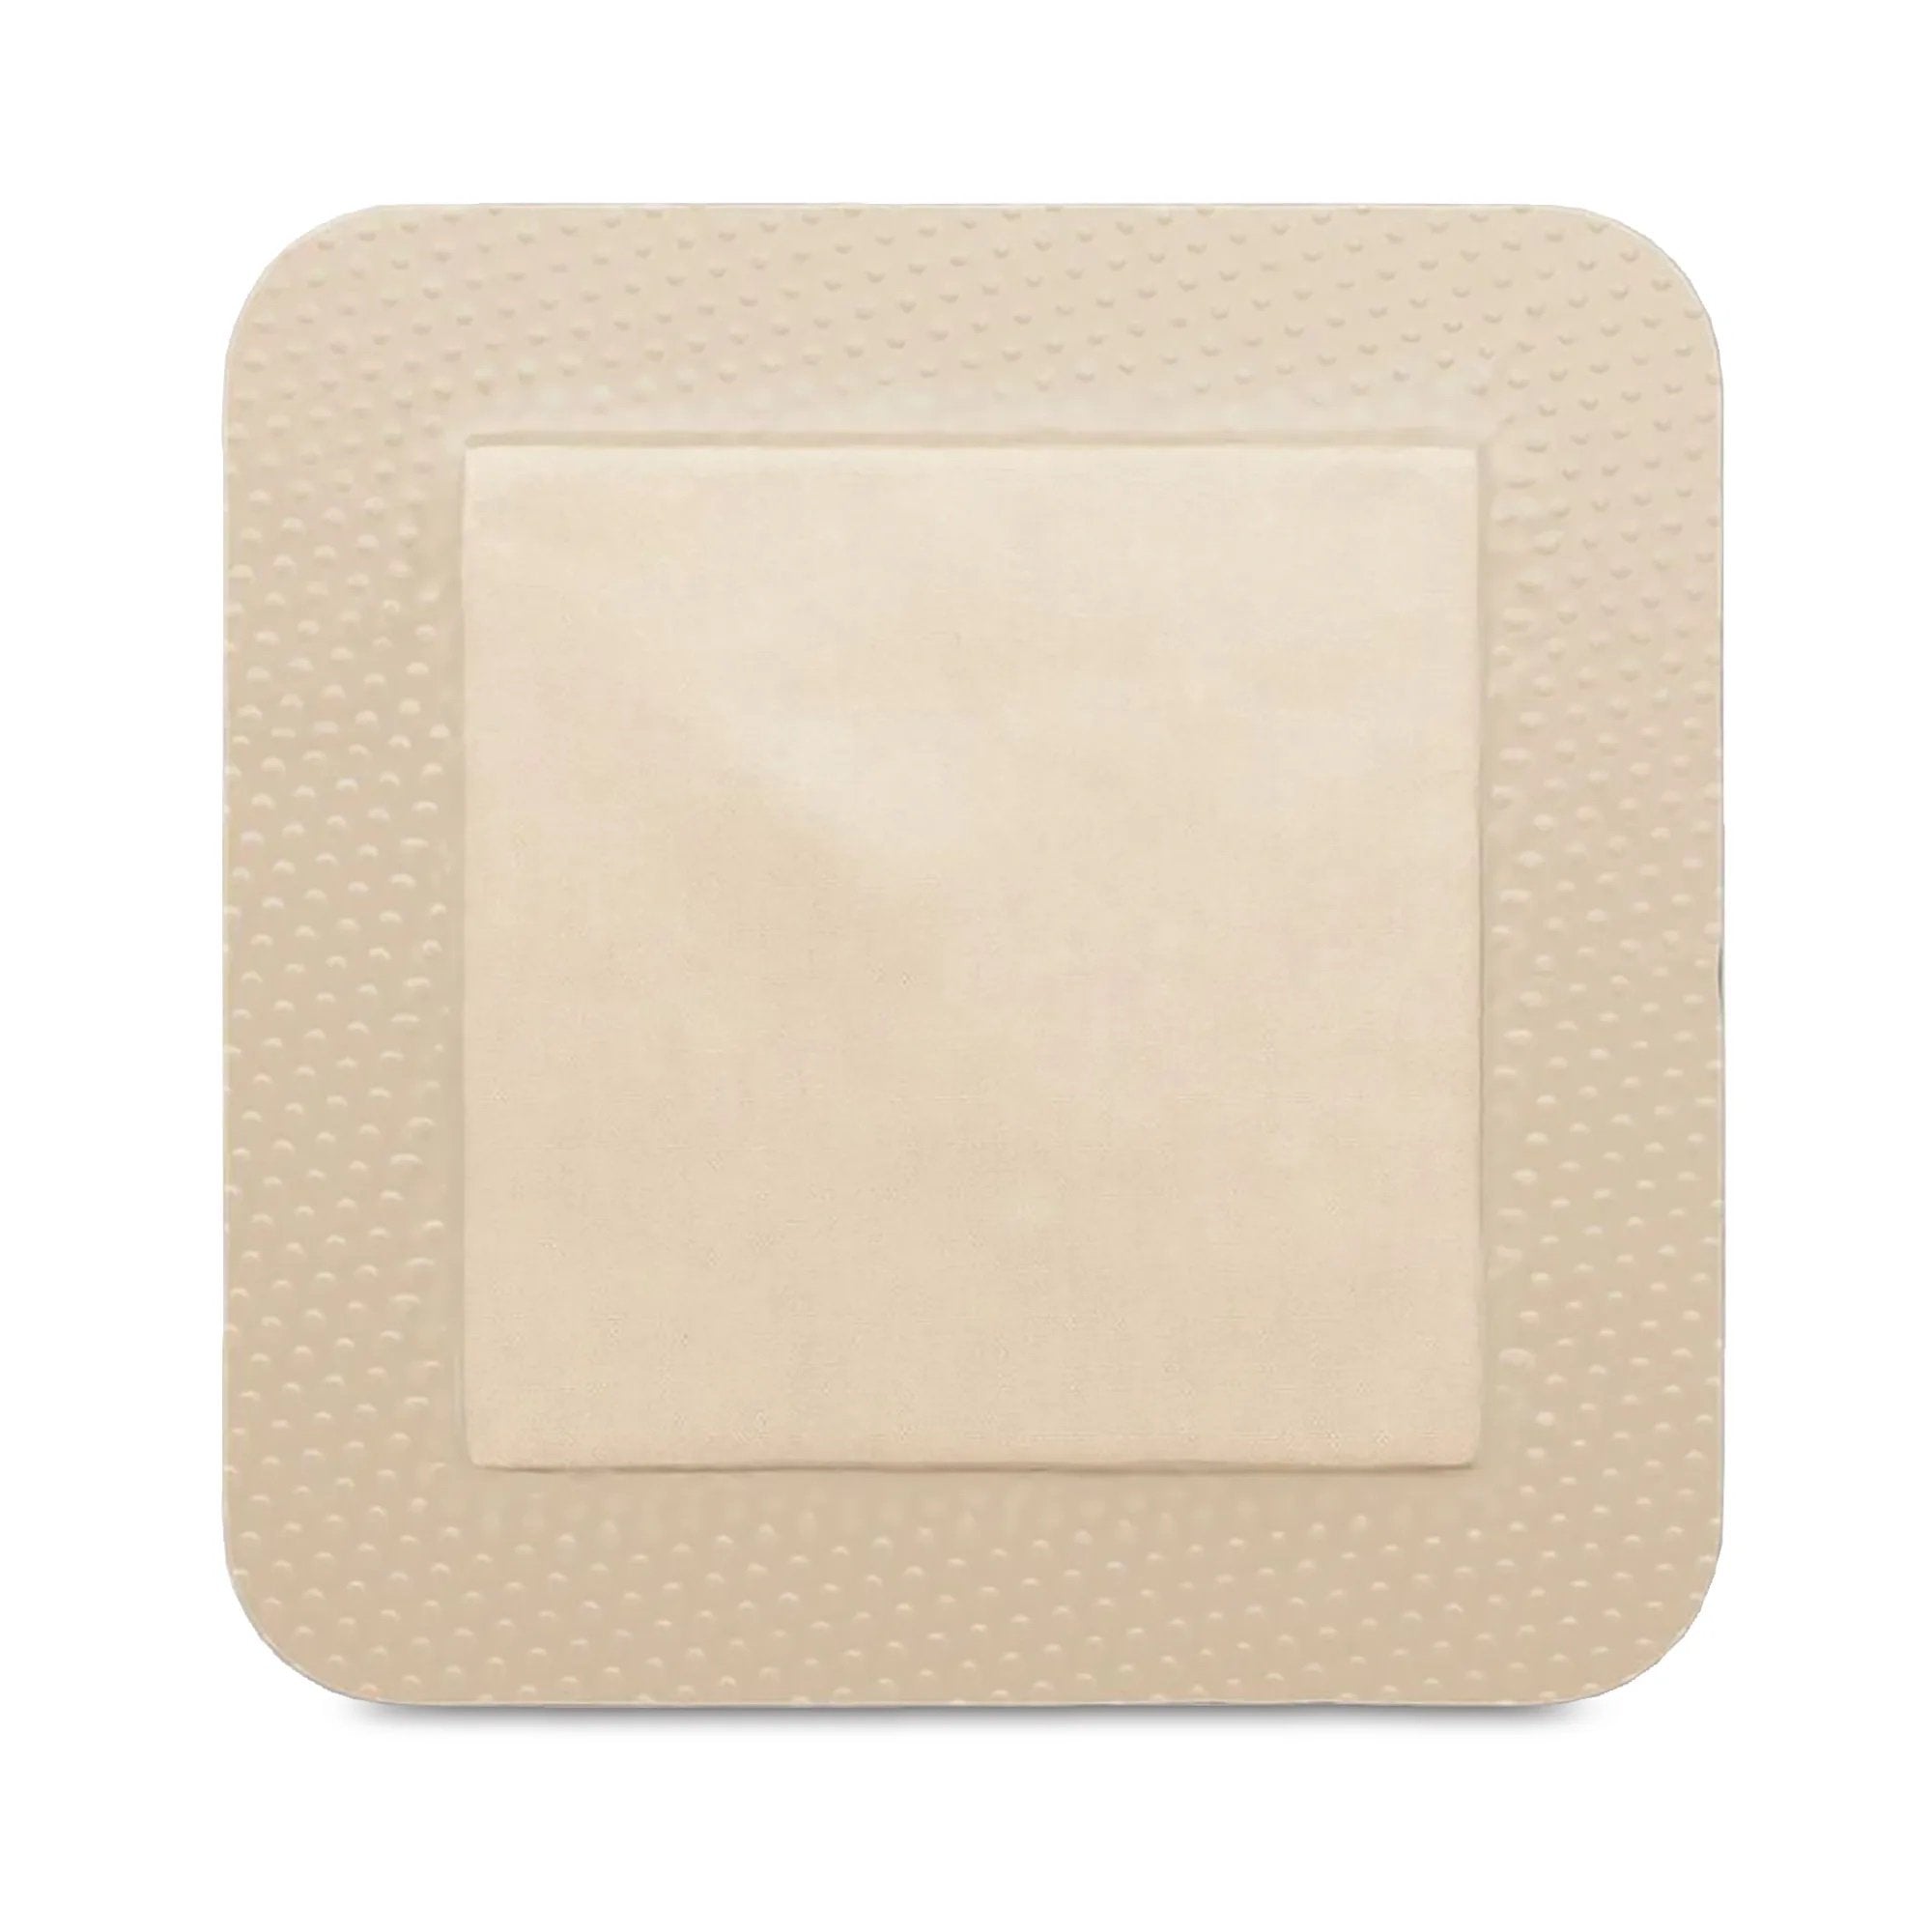 Thin Foam Dressing ComfortFoam™ Border Lite 3 X 3 Inch With Border Waterproof Backing Silicone Adhesive Square Sterile